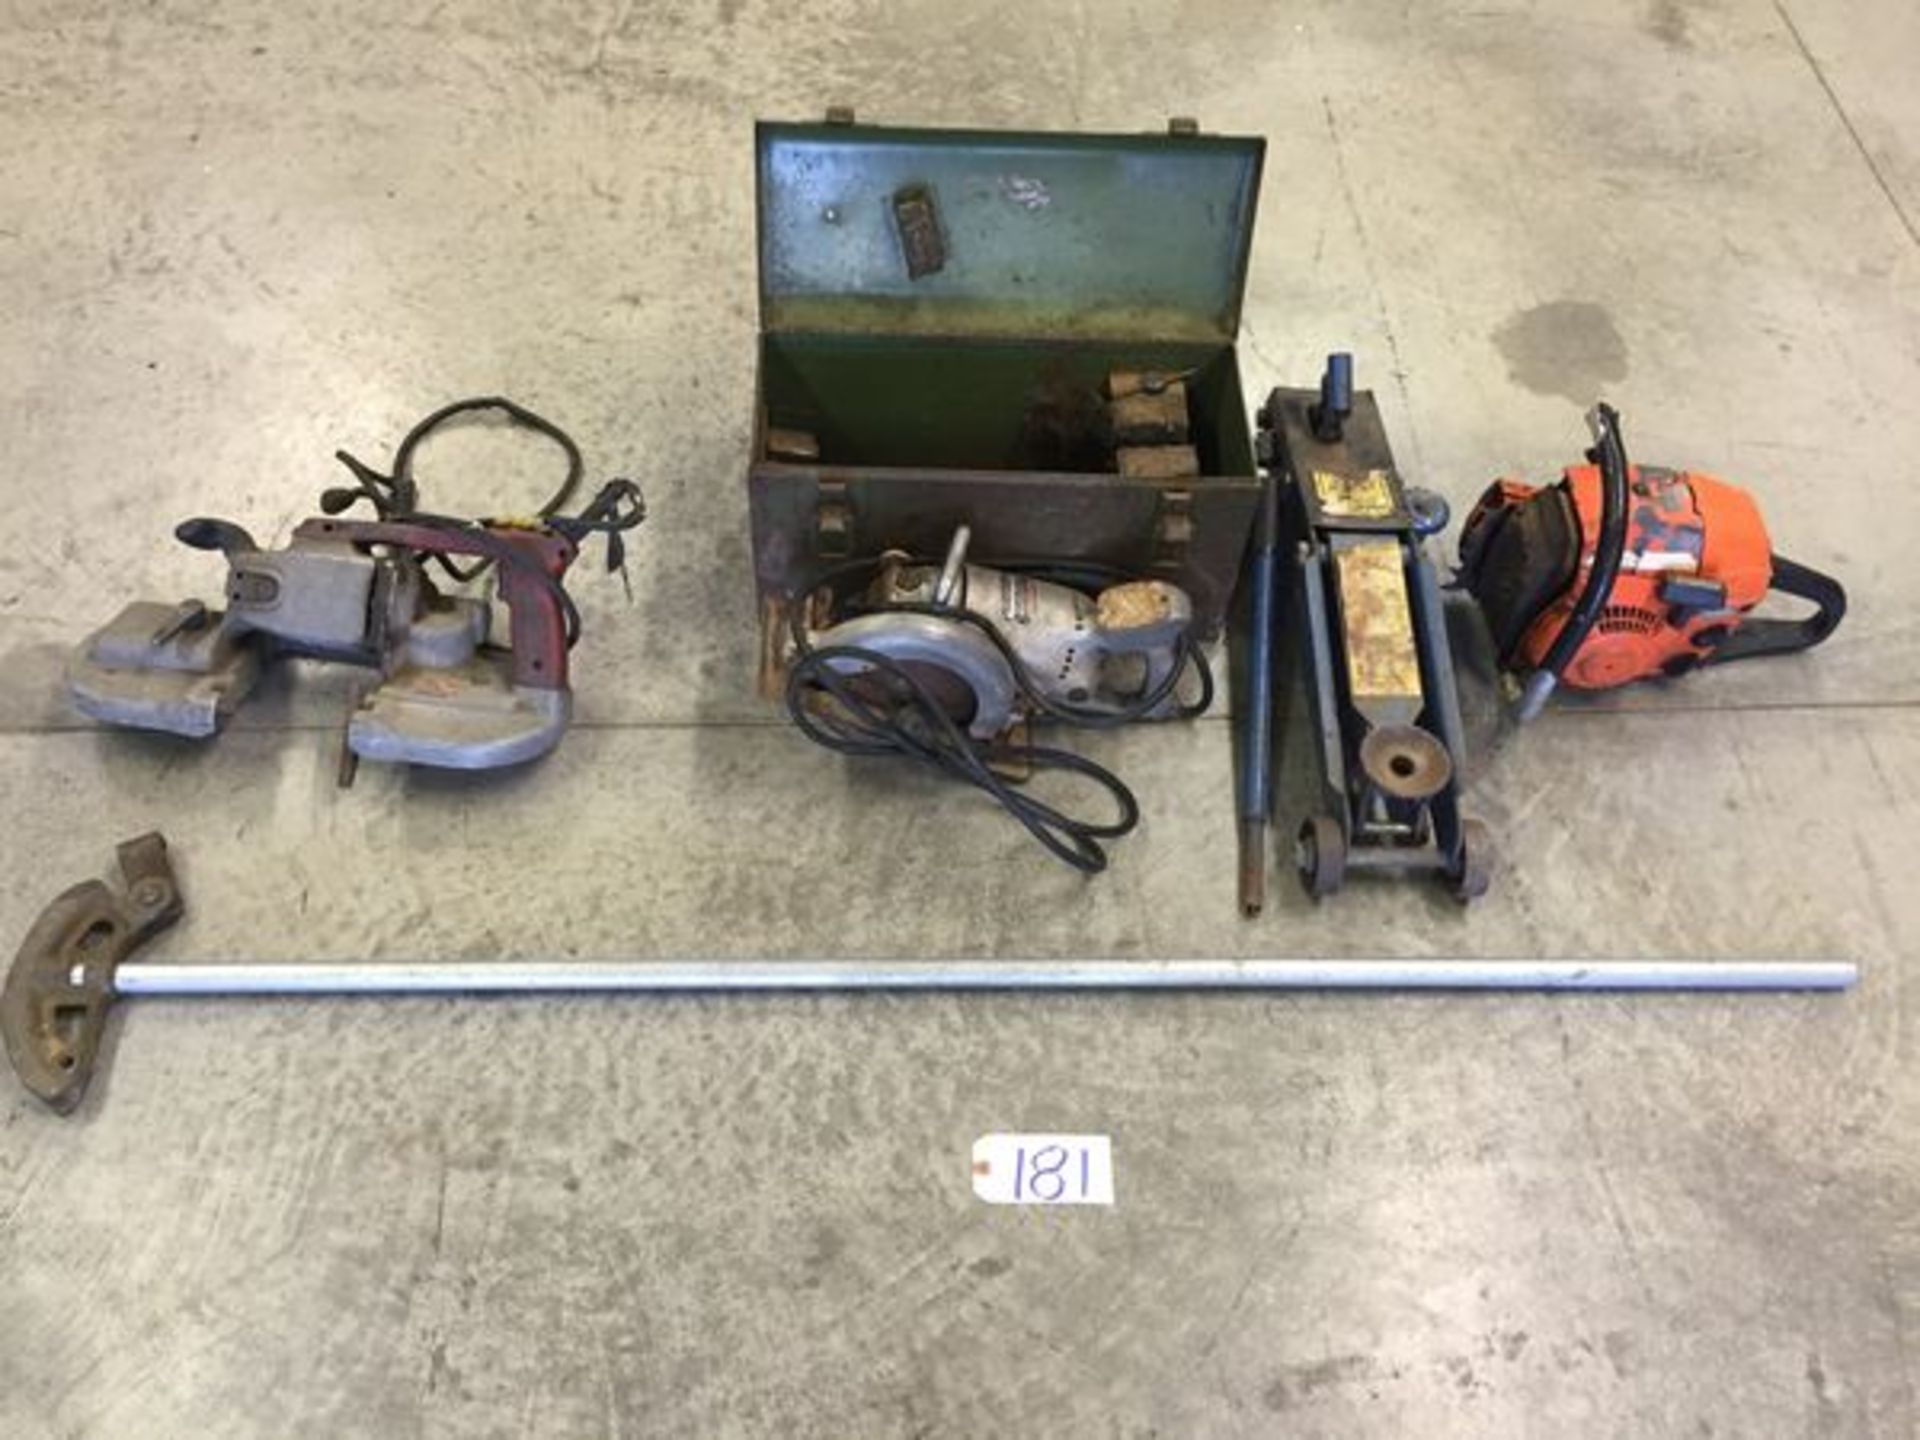 Lot of Tools Milwaukee Band Saw, Bender, Quick Saw, Jack